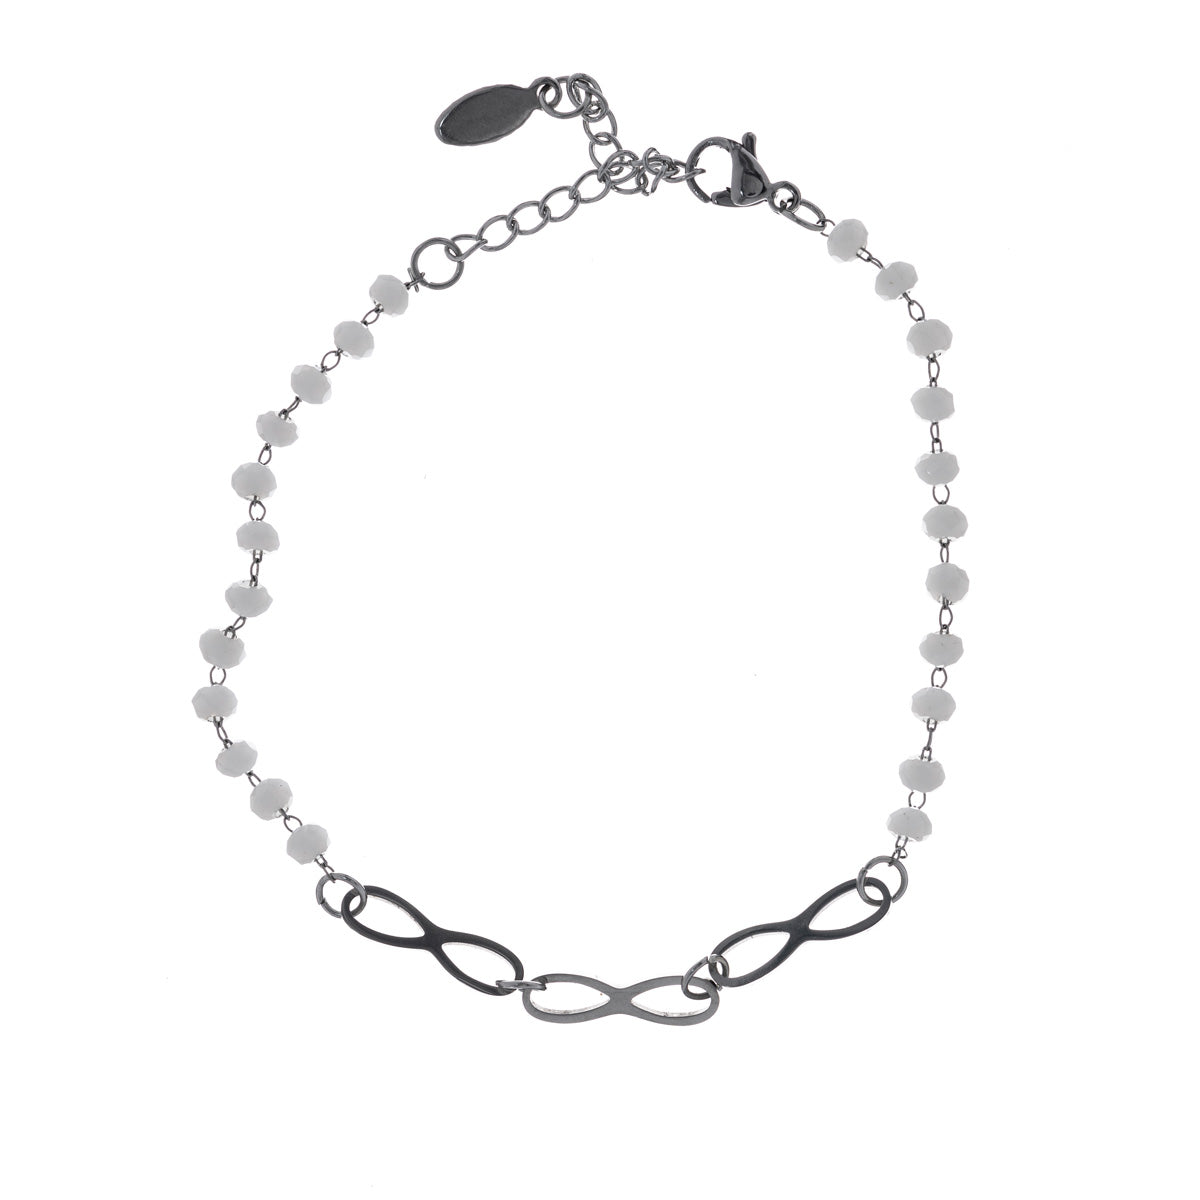 Steel bracelet with bevelled glass beads